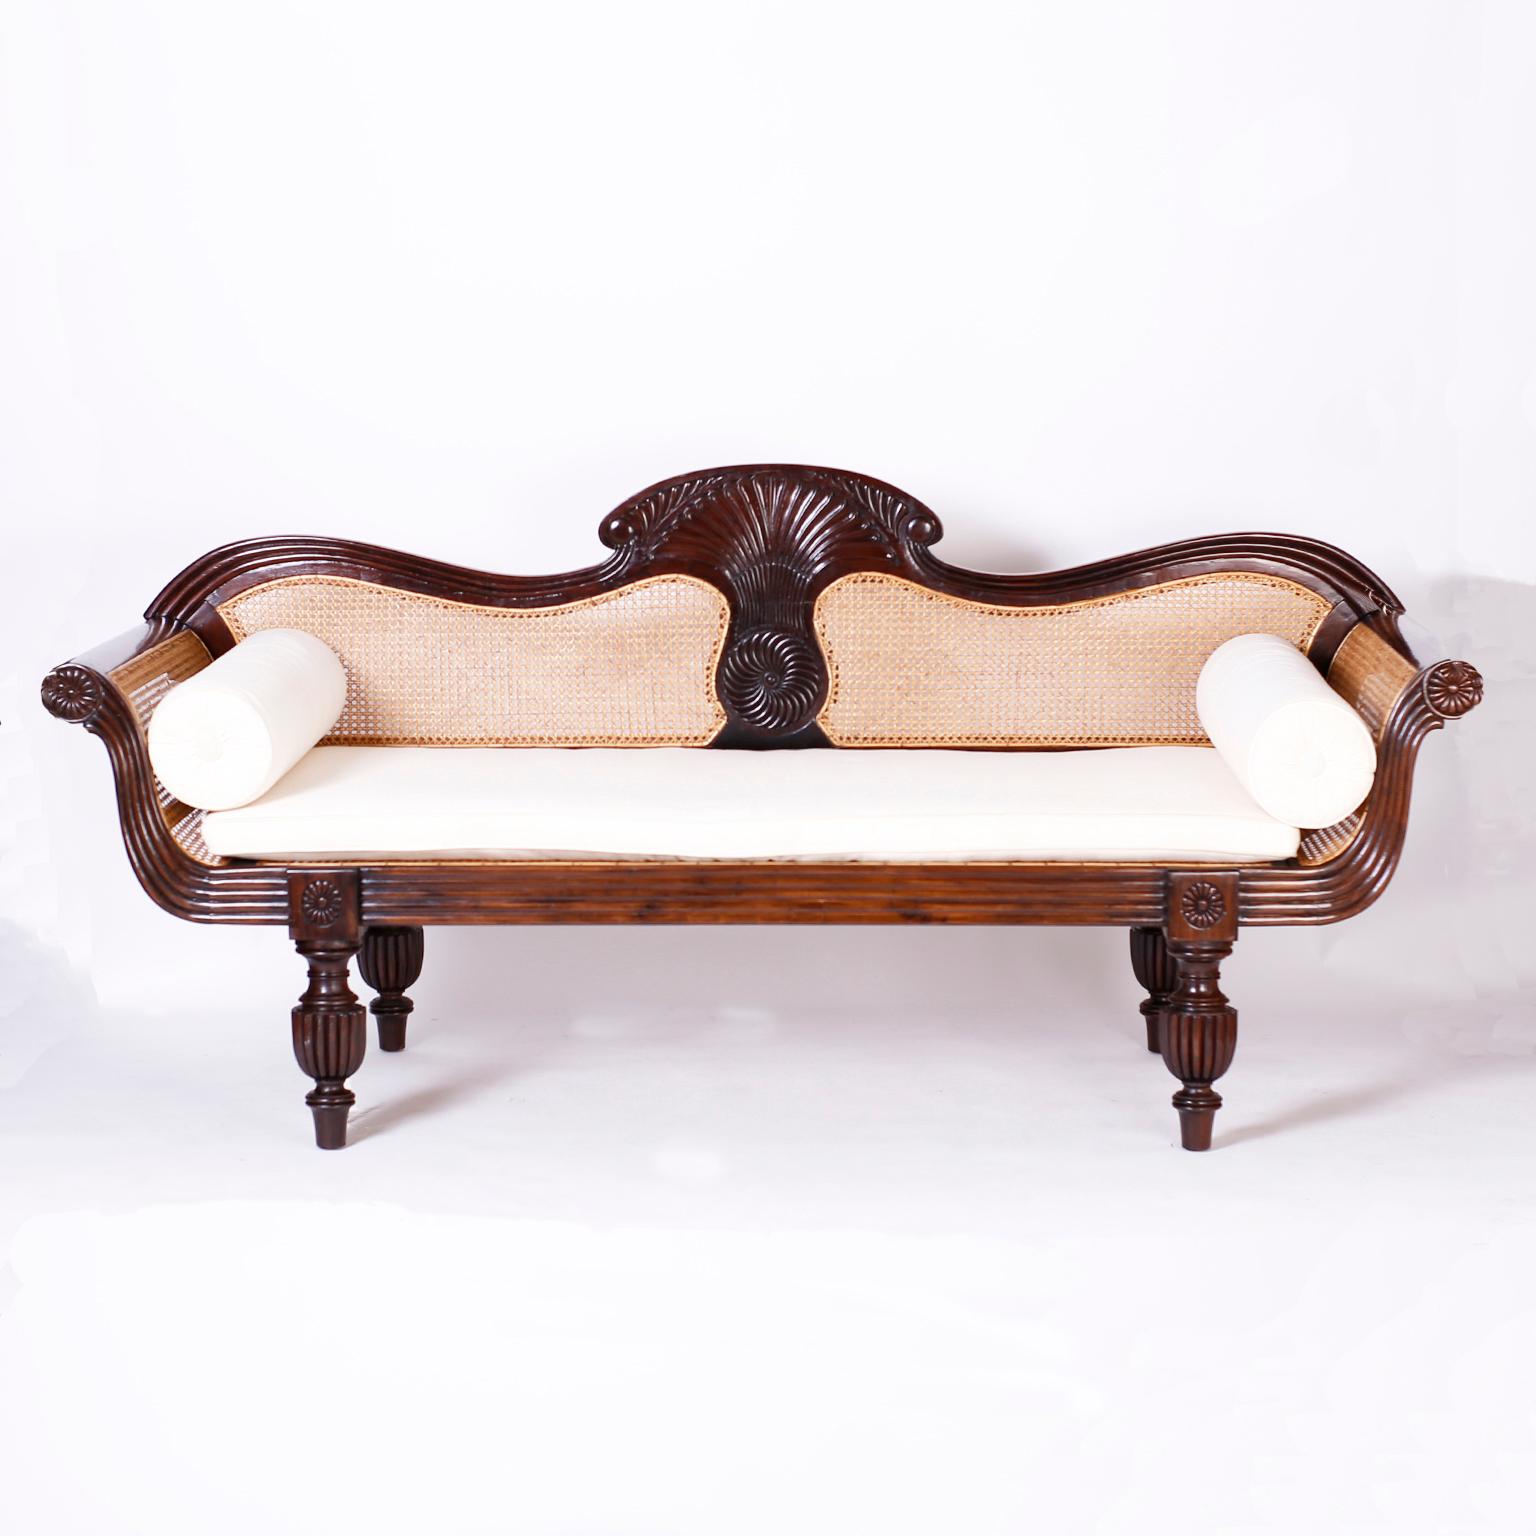 Antique British colonial Anglo Indian settee or sofa crafted in rosewood featuring a carved center back, caned seat, back and sides, beaded and carved front facade and turned and beaded classical legs.